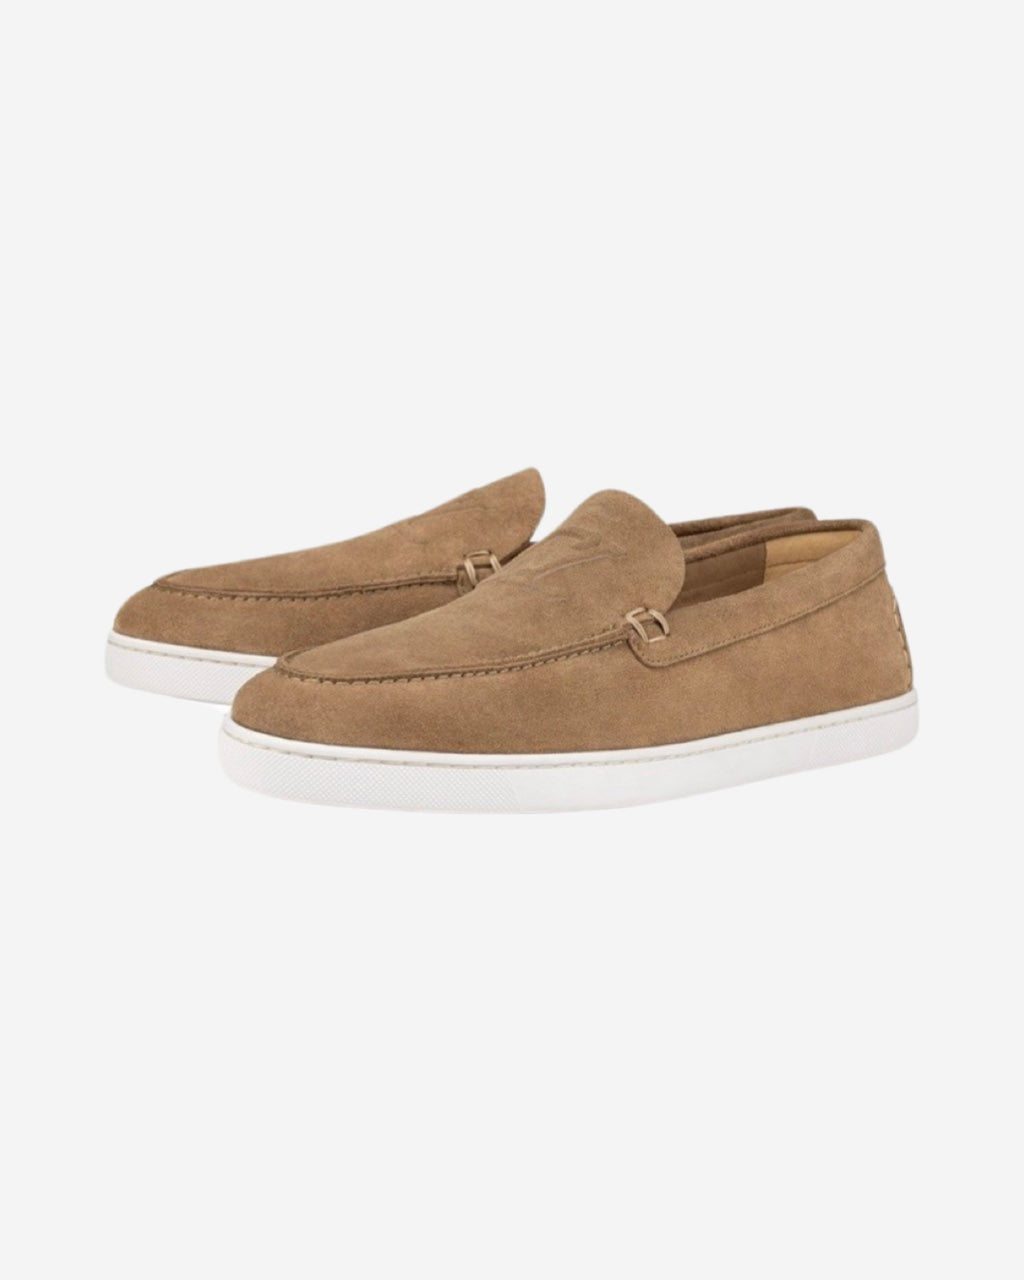 Christian Louboutin Suede Loafers